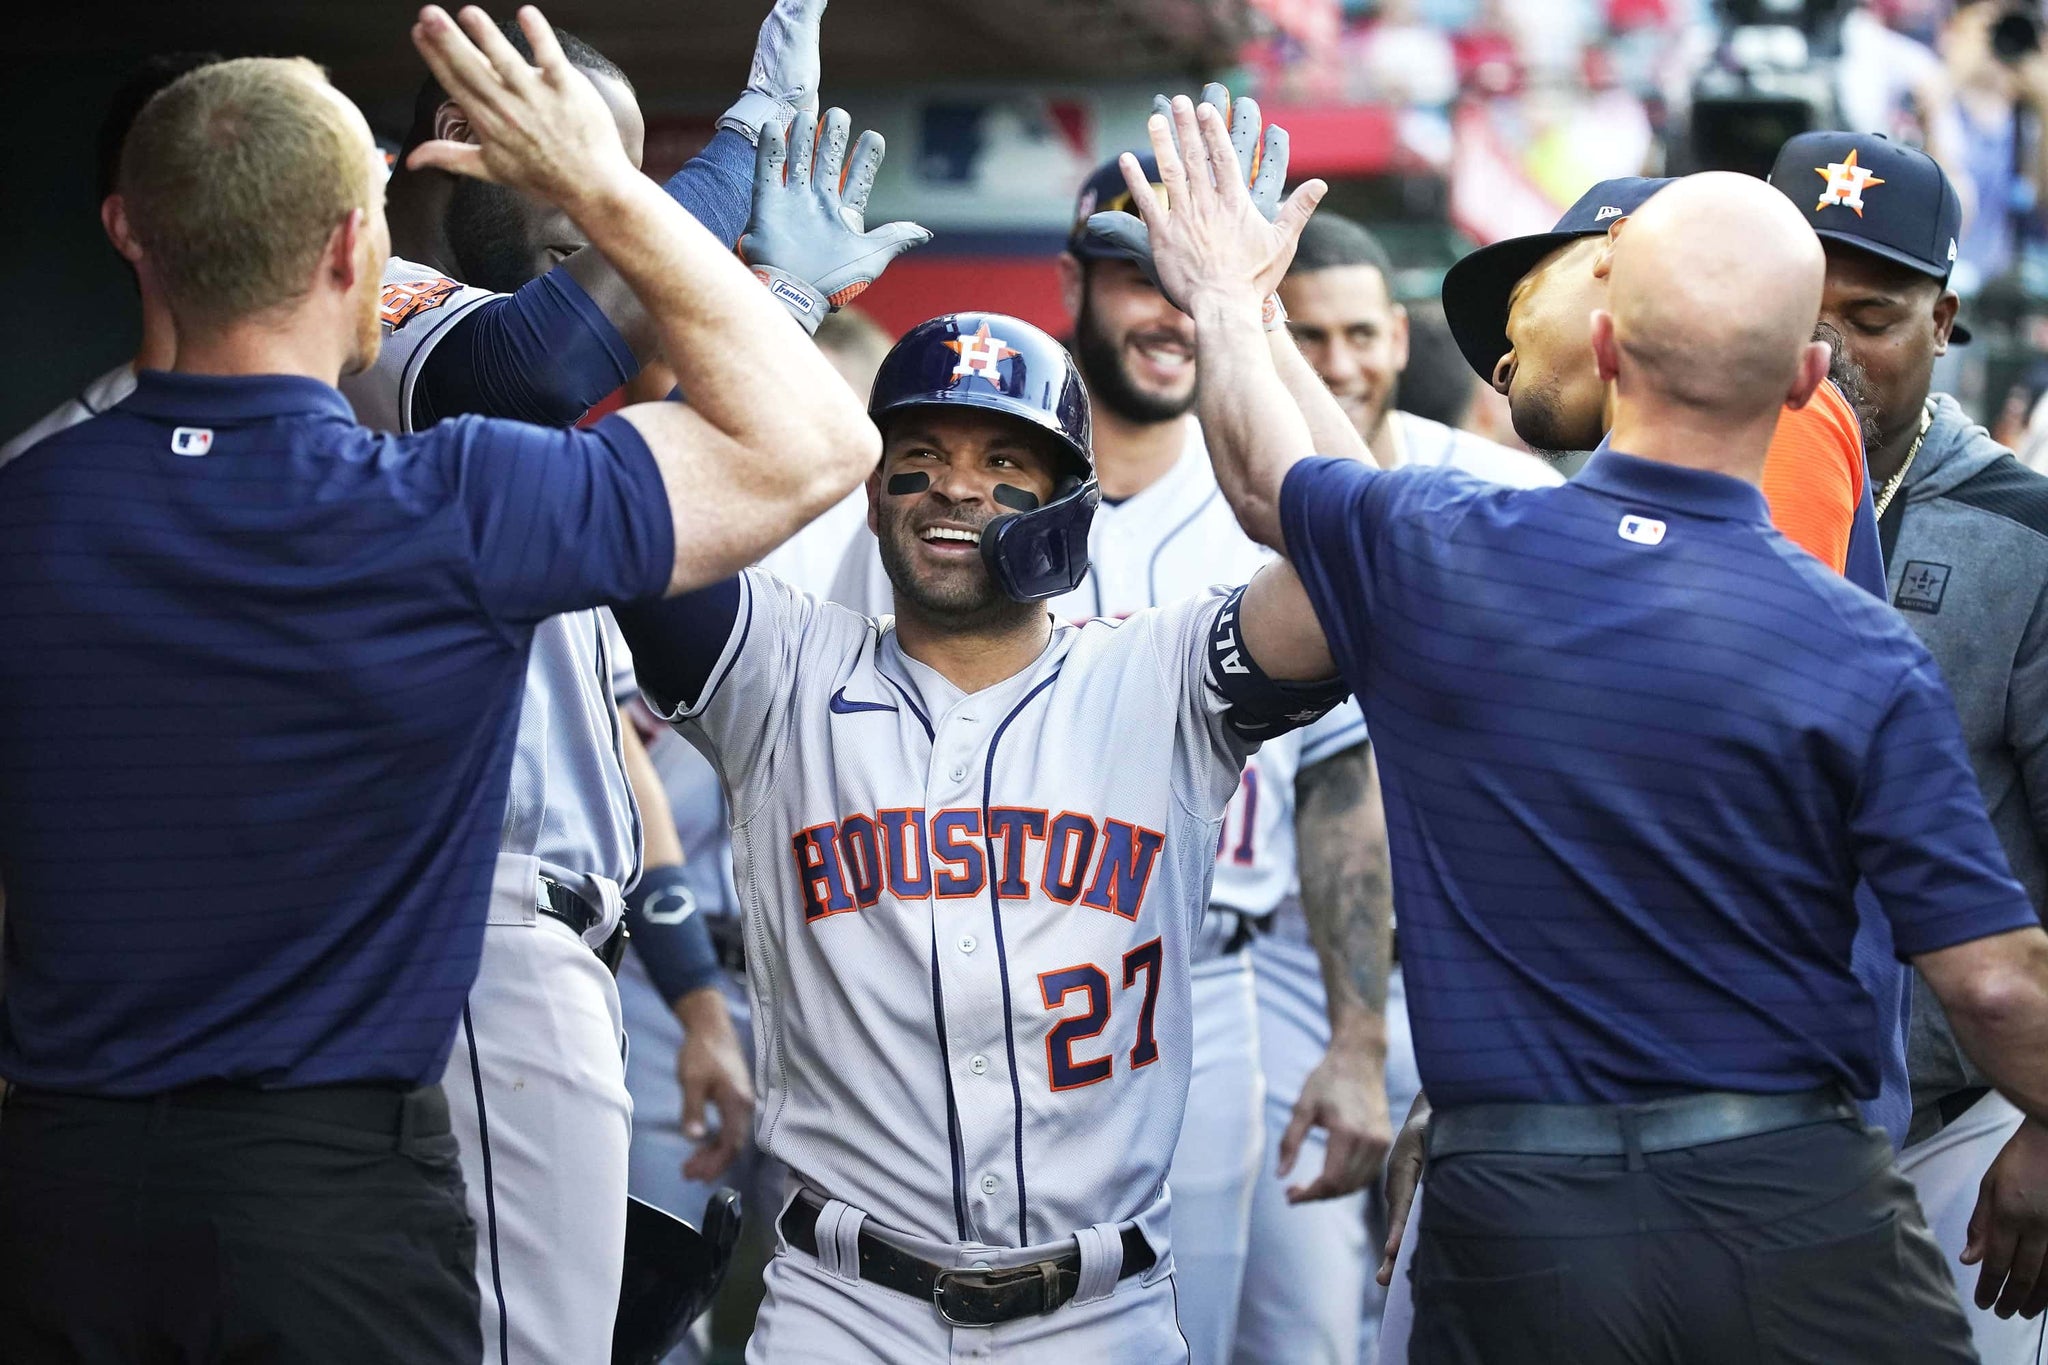 Closing the book on 2022 MLB season, a confession: I dig the Astros